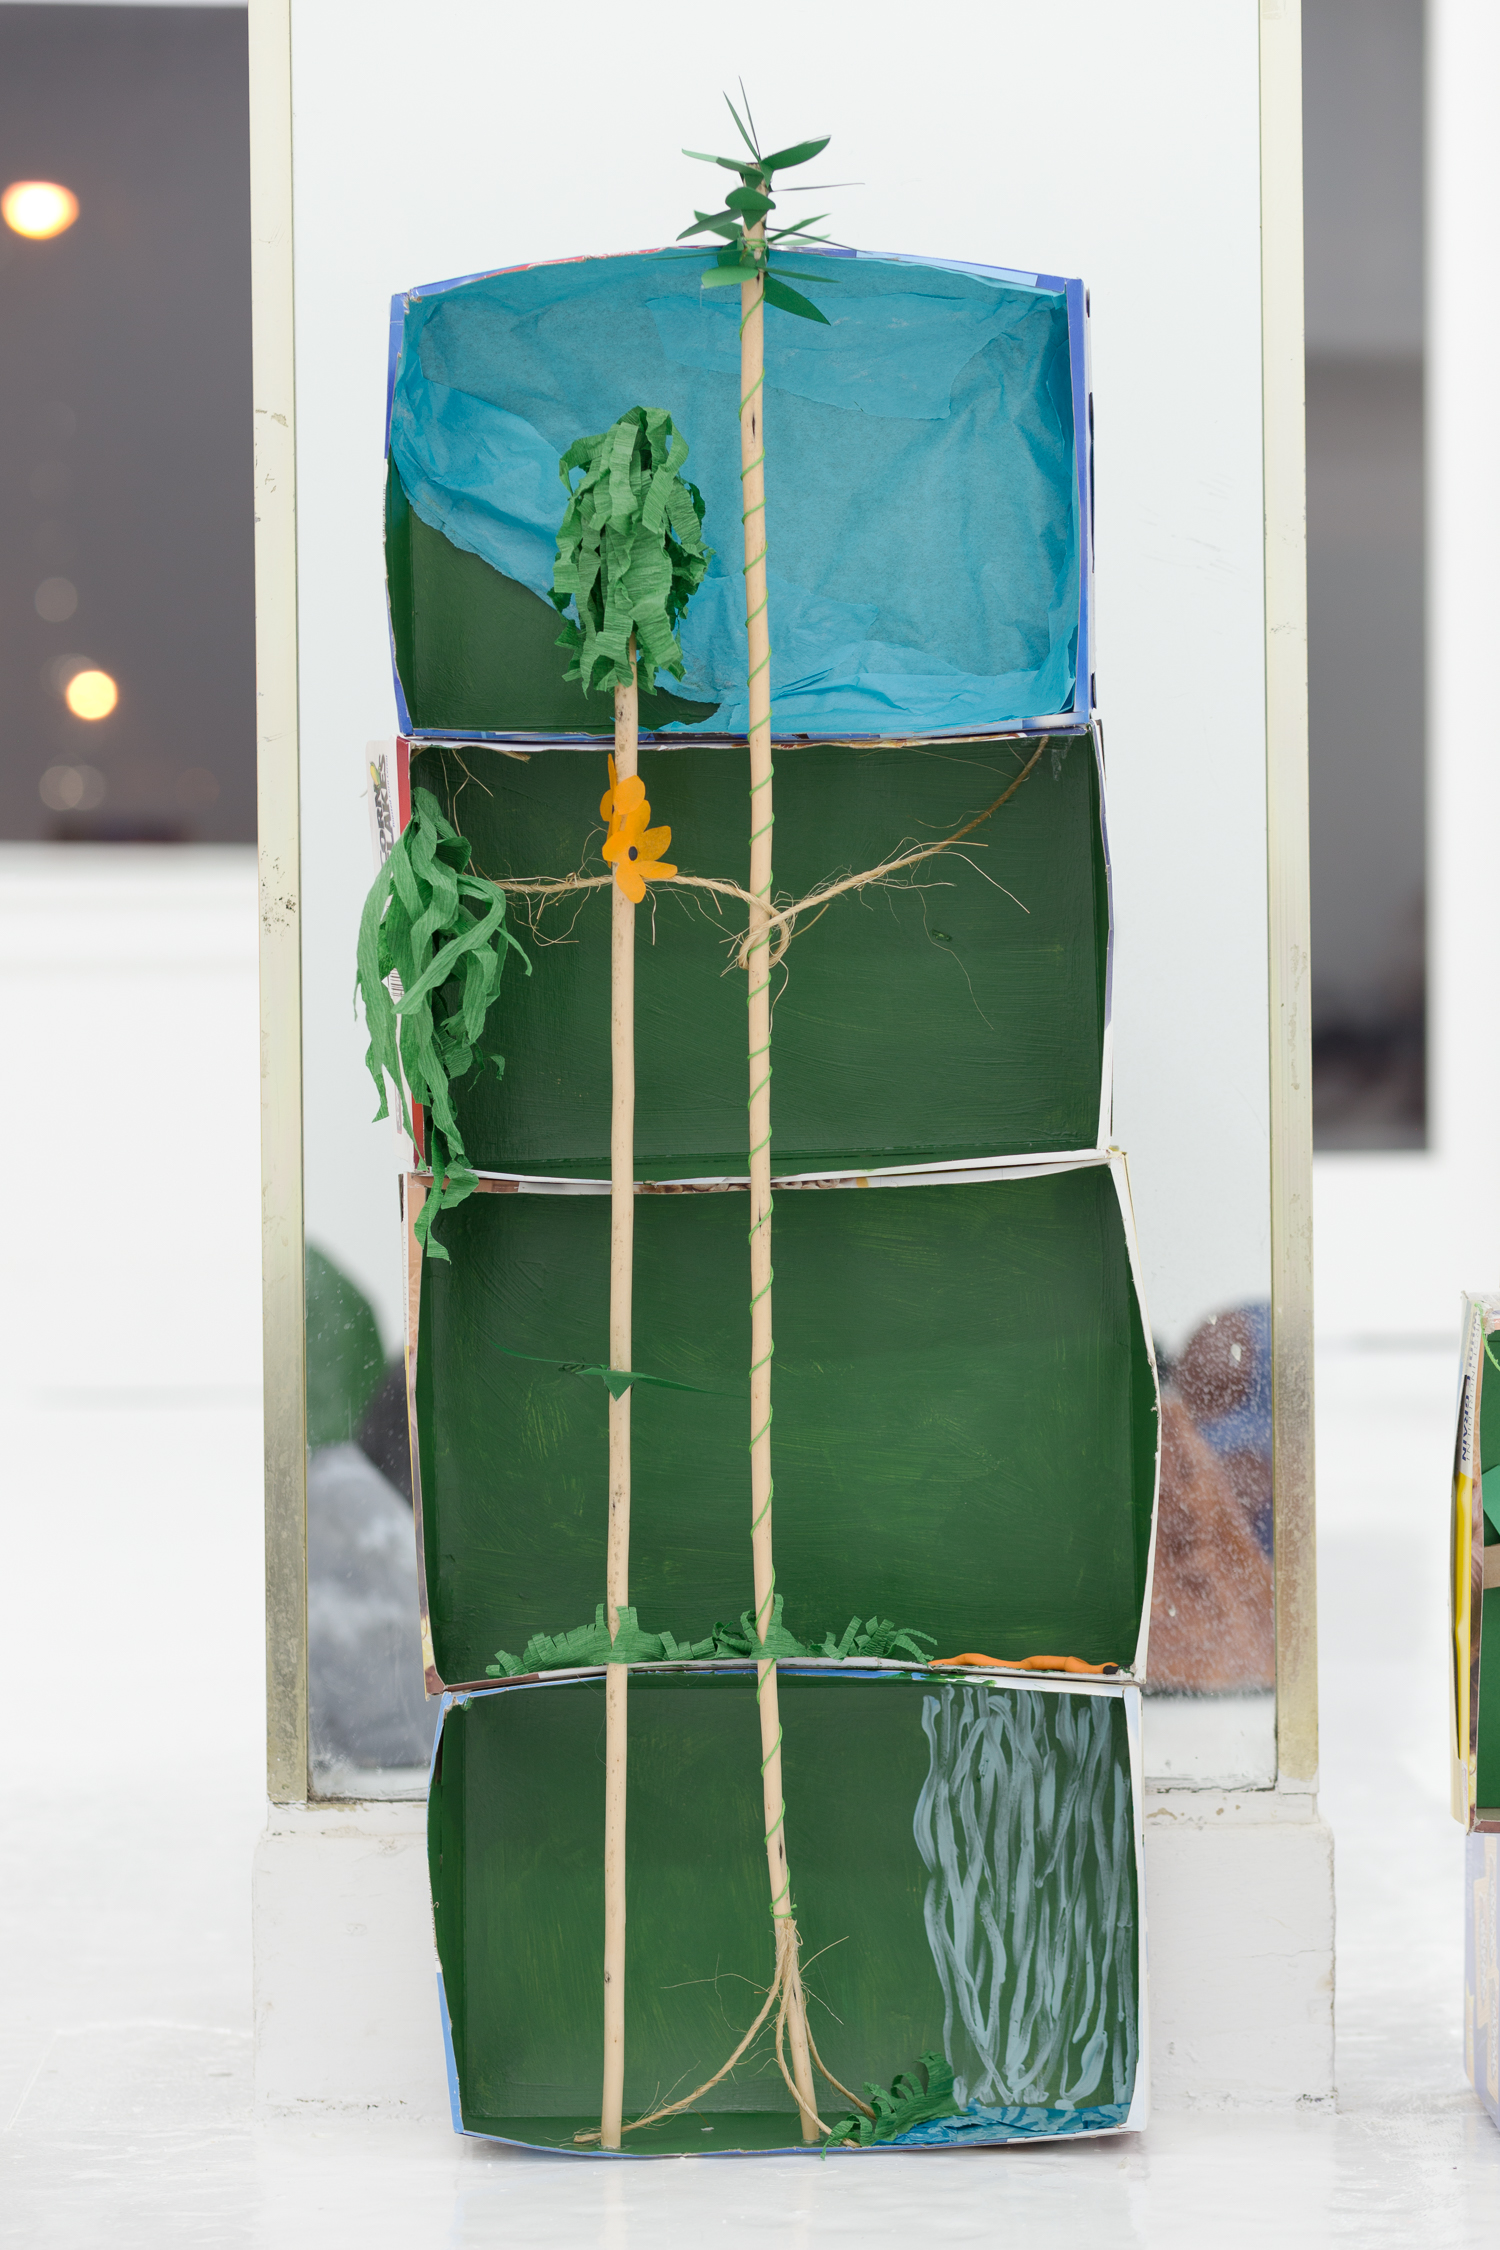 Rainforest diorama made of stacked boxes, wooden dowels, and crepe paper